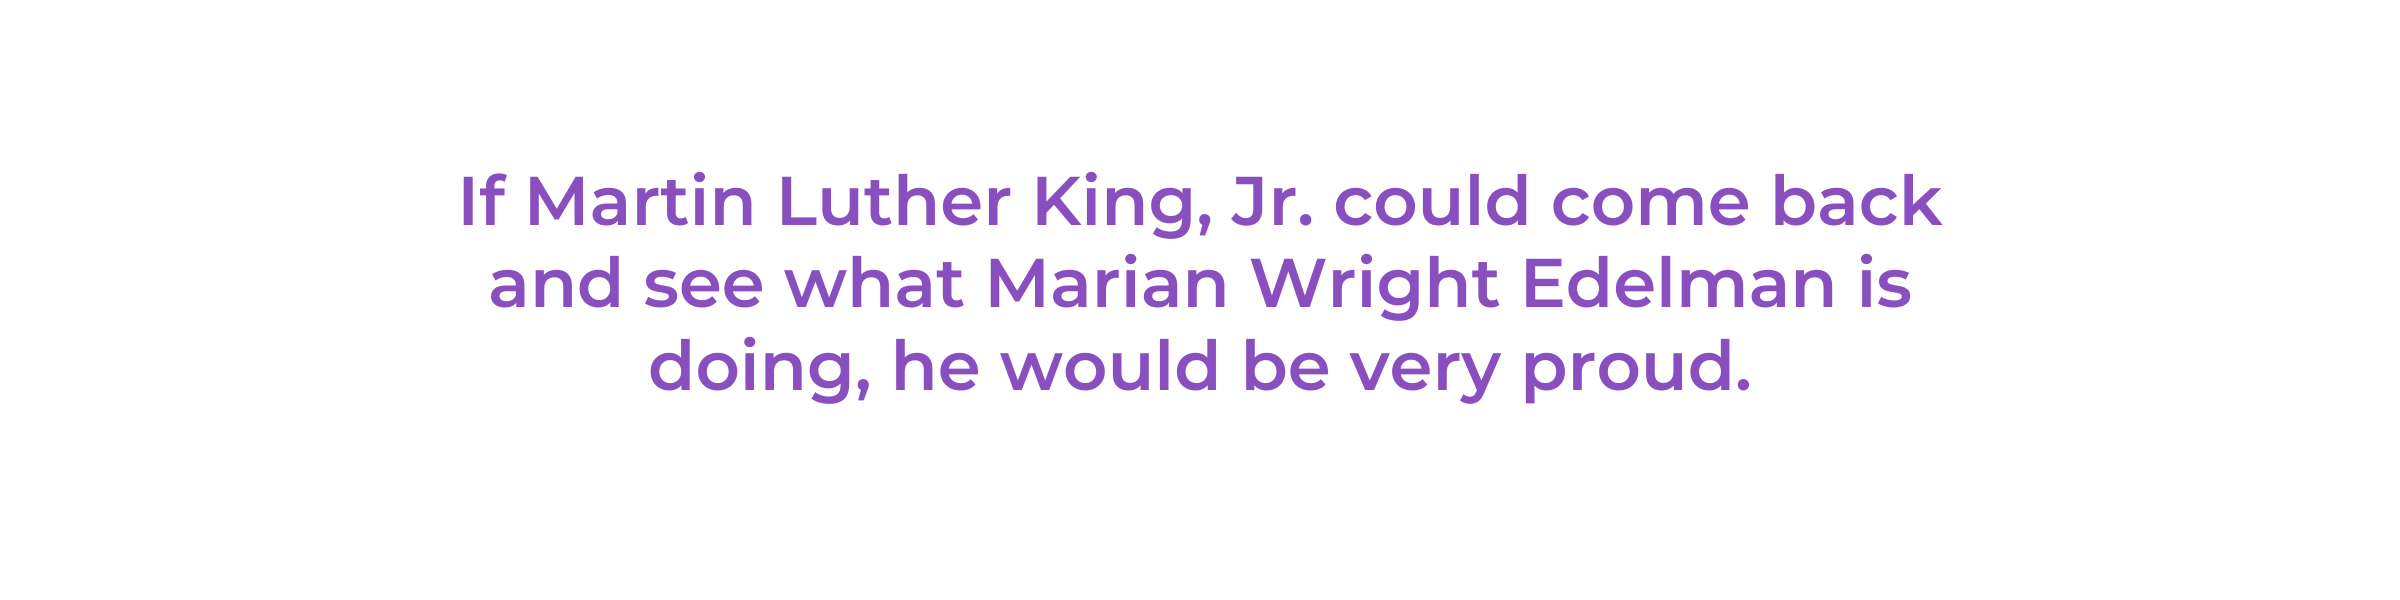 If Martin Luther King, Jr. could come back and see what Marian Wright Edelman is doing, he would be very proud.